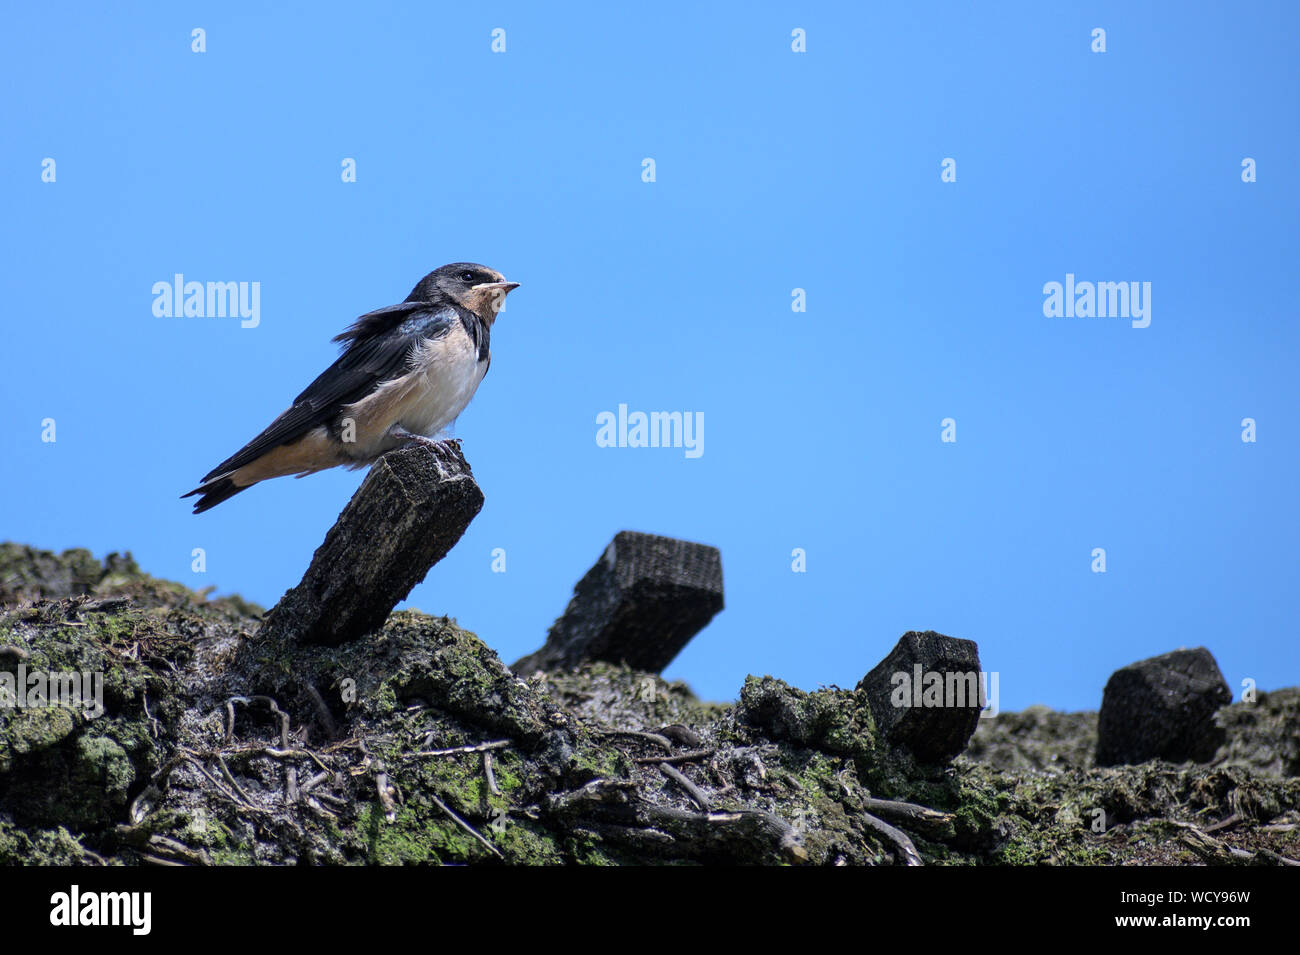 young barn swallow bird (Hirundo rustica) is perching on a thatched roof on a sunny day against the blue sky, copy space Stock Photo